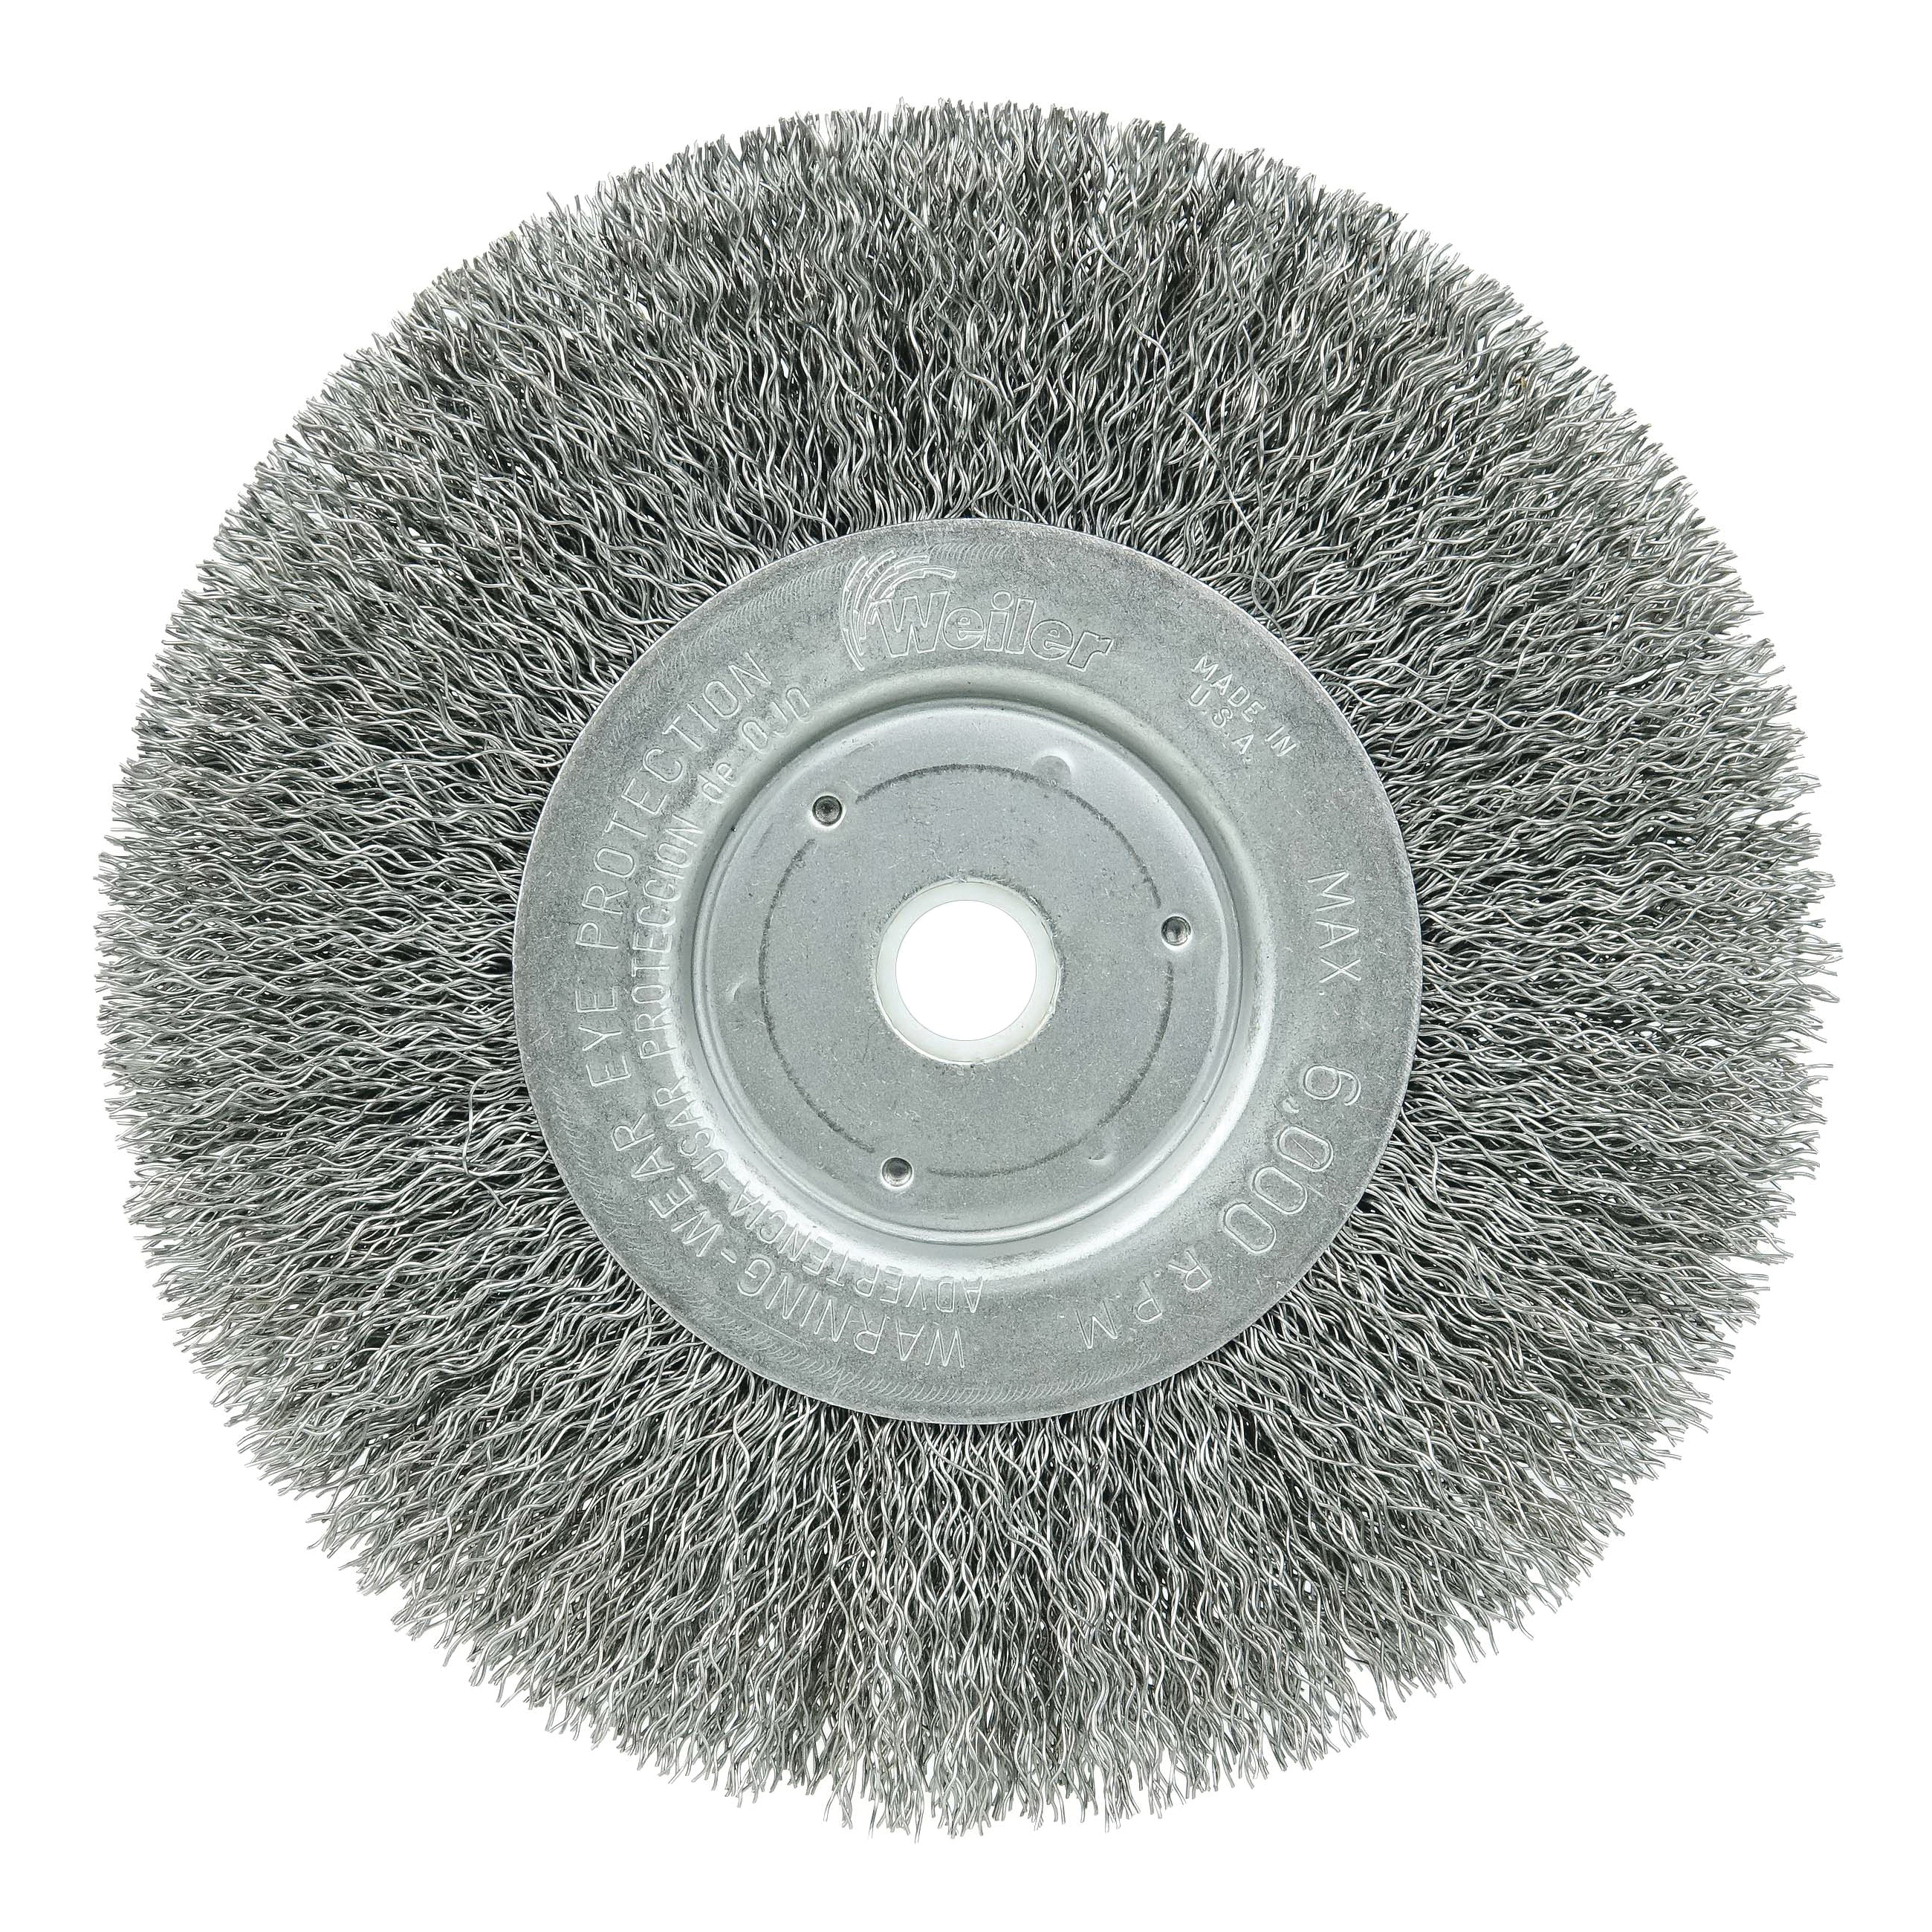 Weiler® 01068 TLN-6 Narrow Face Wheel Brush, 6 in Dia Brush, 3/4 in W Face, 0.0118 in Dia Filament/Wire Crimped Filament/Wire, 3/4 in Arbor Hole